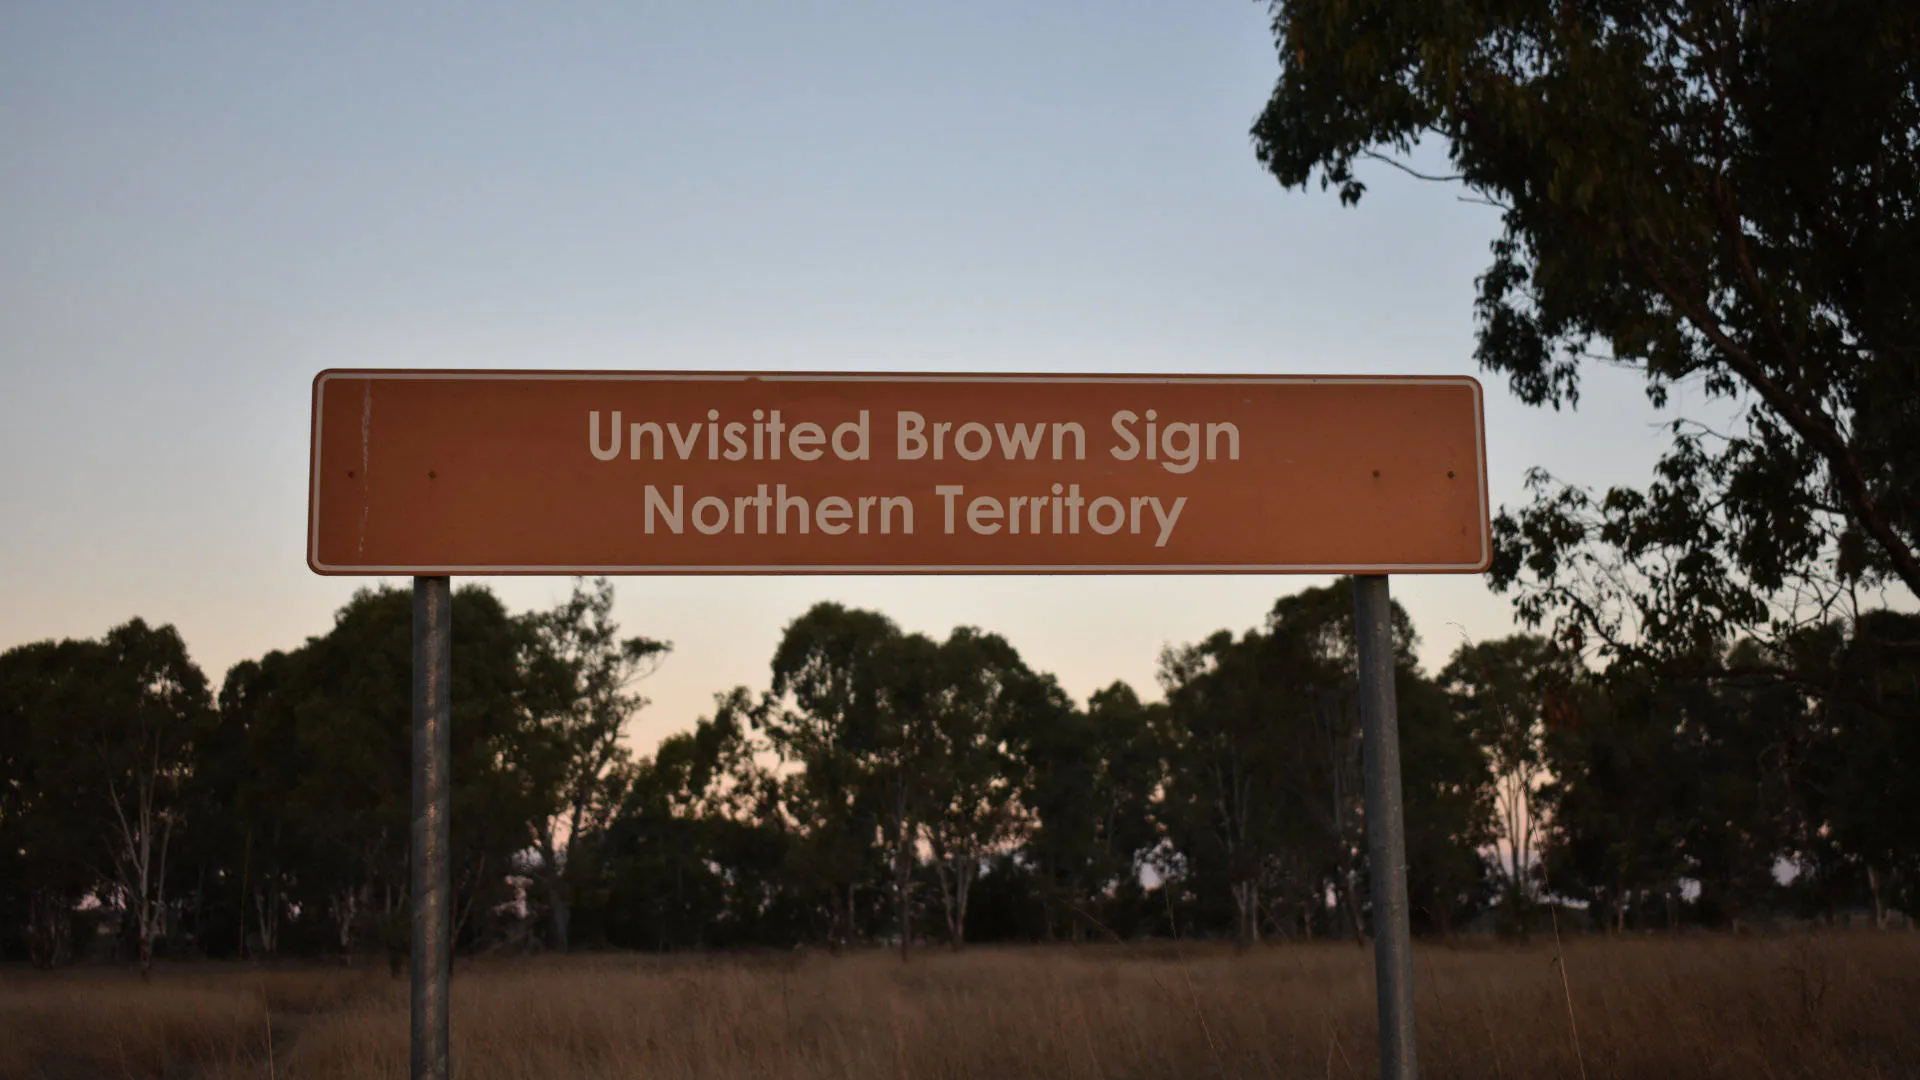 Unvisited Brown Sign Northern Territory